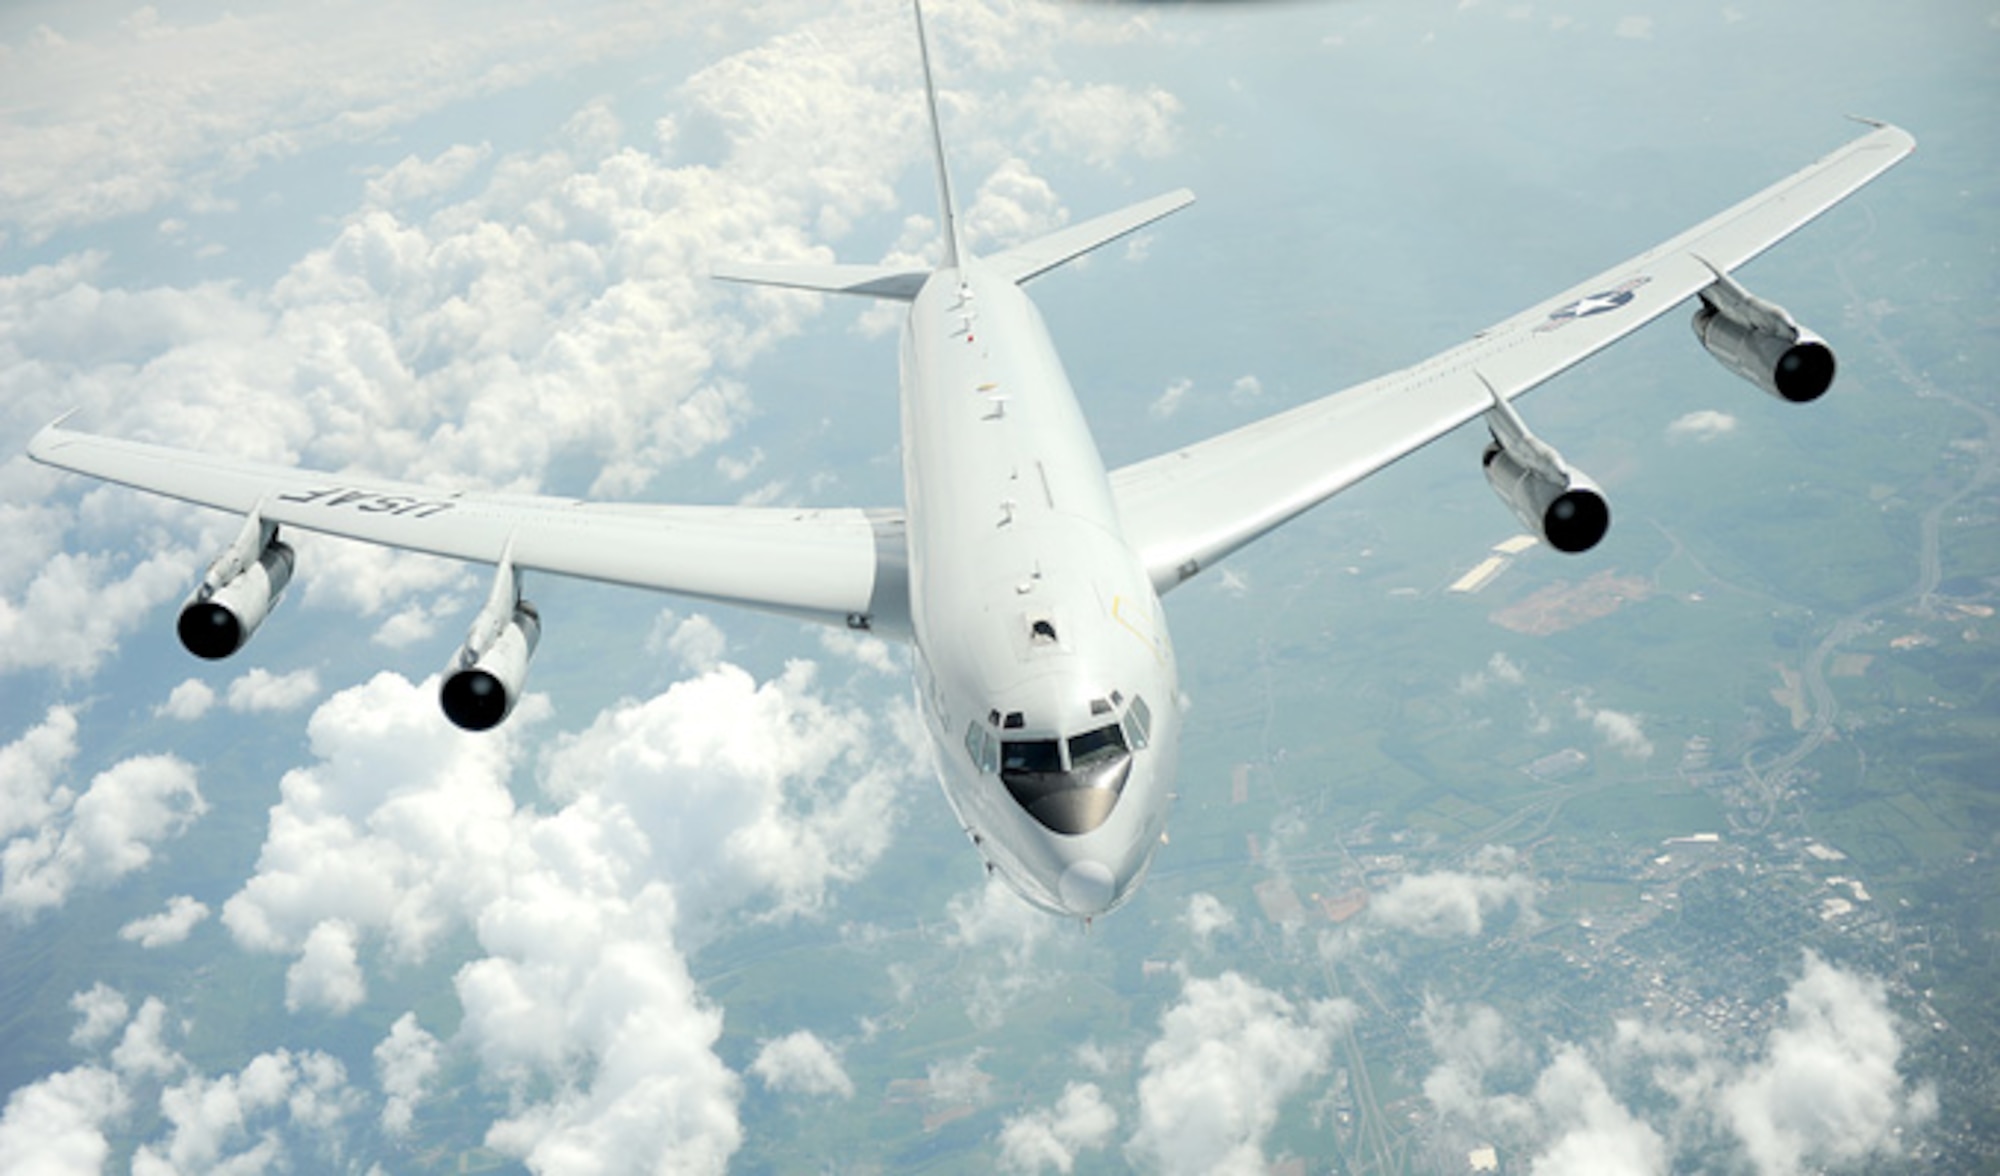 An E-8C Joint STARS from the 116th Air Control Wing, Robins Air Force Base, Ga., pulls away, May 1, 2012, after refueling from a KC-135 Stratotanker with the 459th Air Refueling Wing, Joint Base Andrews, Md. The E-8C Joint Surveillance Target Attack Radar System, or Joint STARS, is an airborne battle management, command and control, intelligence, surveillance and reconnaissance platform. Its primary mission is to provide theater ground and air commanders with ground surveillance to support attack operations and targeting that contributes to the delay, disruption and destruction of enemy forces. (U.S. Air Force photo/Master Sgt. Jeremy Lock)